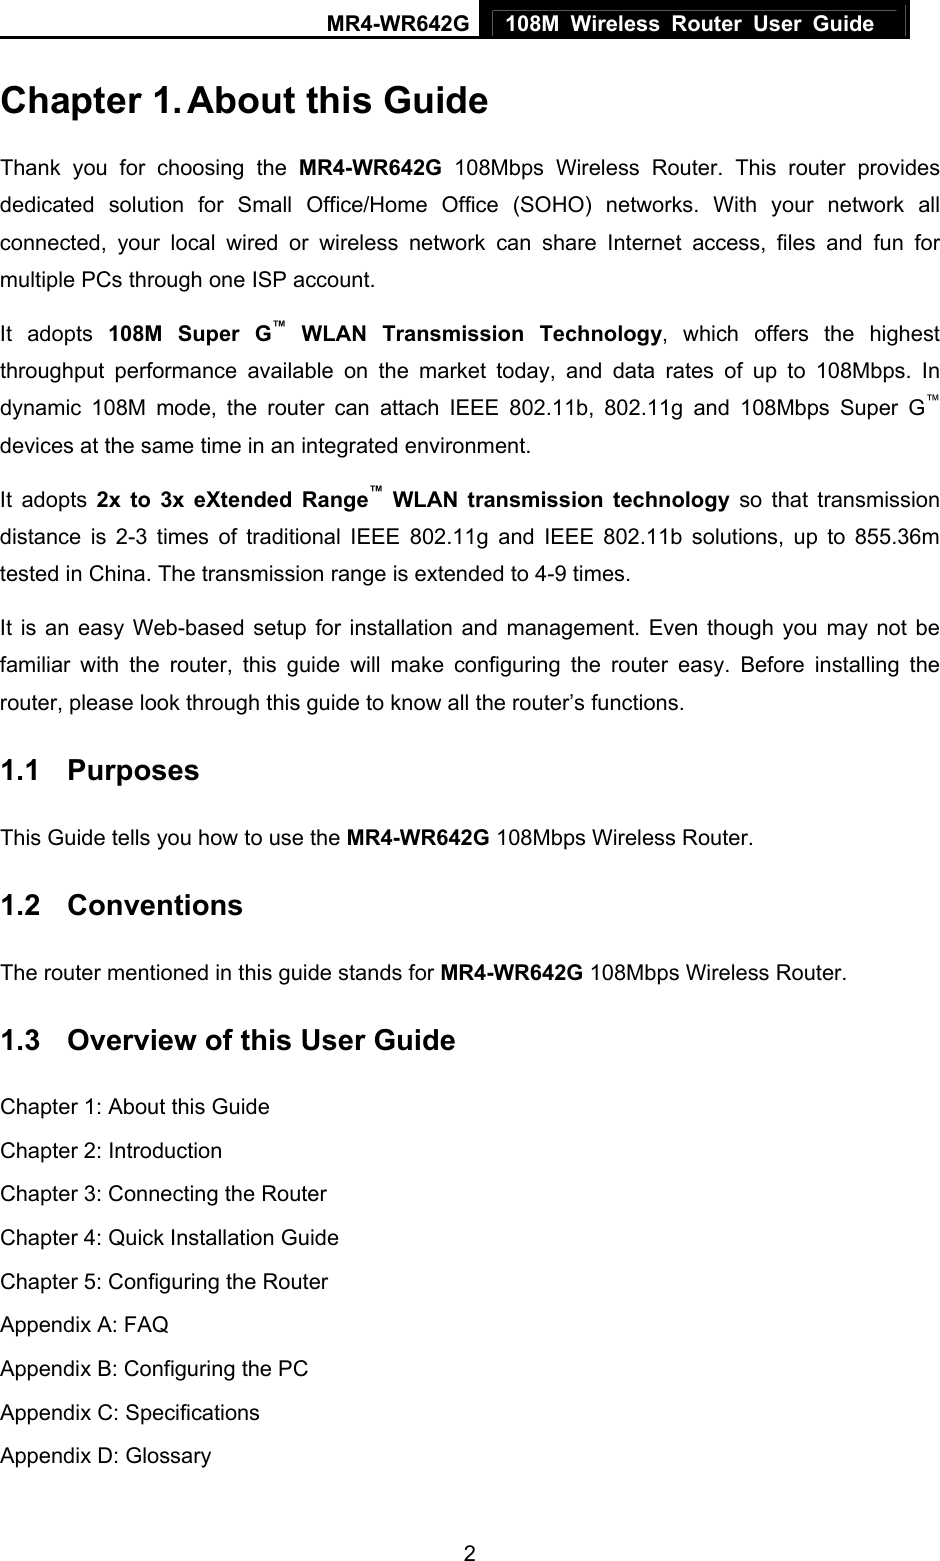 MR4-WR642G 108M Wireless Router User Guide   2Chapter 1. About this Guide Thank you for choosing the MR4-WR642G 108Mbps Wireless Router. This router provides dedicated solution for Small Office/Home Office (SOHO) networks. With your network all connected, your local wired or wireless network can share Internet access, files and fun for multiple PCs through one ISP account.     It adopts 108M Super G™ WLAN Transmission Technology, which offers the highest throughput performance available on the market today, and data rates of up to 108Mbps. In dynamic 108M mode, the router can attach IEEE 802.11b, 802.11g and 108Mbps Super G™ devices at the same time in an integrated environment. It adopts 2x to 3x eXtended Range™ WLAN transmission technology so that transmission distance is 2-3 times of traditional IEEE 802.11g and IEEE 802.11b solutions, up to 855.36m tested in China. The transmission range is extended to 4-9 times. It is an easy Web-based setup for installation and management. Even though you may not be familiar with the router, this guide will make configuring the router easy. Before installing the router, please look through this guide to know all the router’s functions. 1.1  Purposes This Guide tells you how to use the MR4-WR642G 108Mbps Wireless Router.   1.2  Conventions The router mentioned in this guide stands for MR4-WR642G 108Mbps Wireless Router. 1.3  Overview of this User Guide Chapter 1: About this Guide Chapter 2: Introduction Chapter 3: Connecting the Router Chapter 4: Quick Installation Guide Chapter 5: Configuring the Router Appendix A: FAQ Appendix B: Configuring the PC Appendix C: Specifications Appendix D: Glossary 